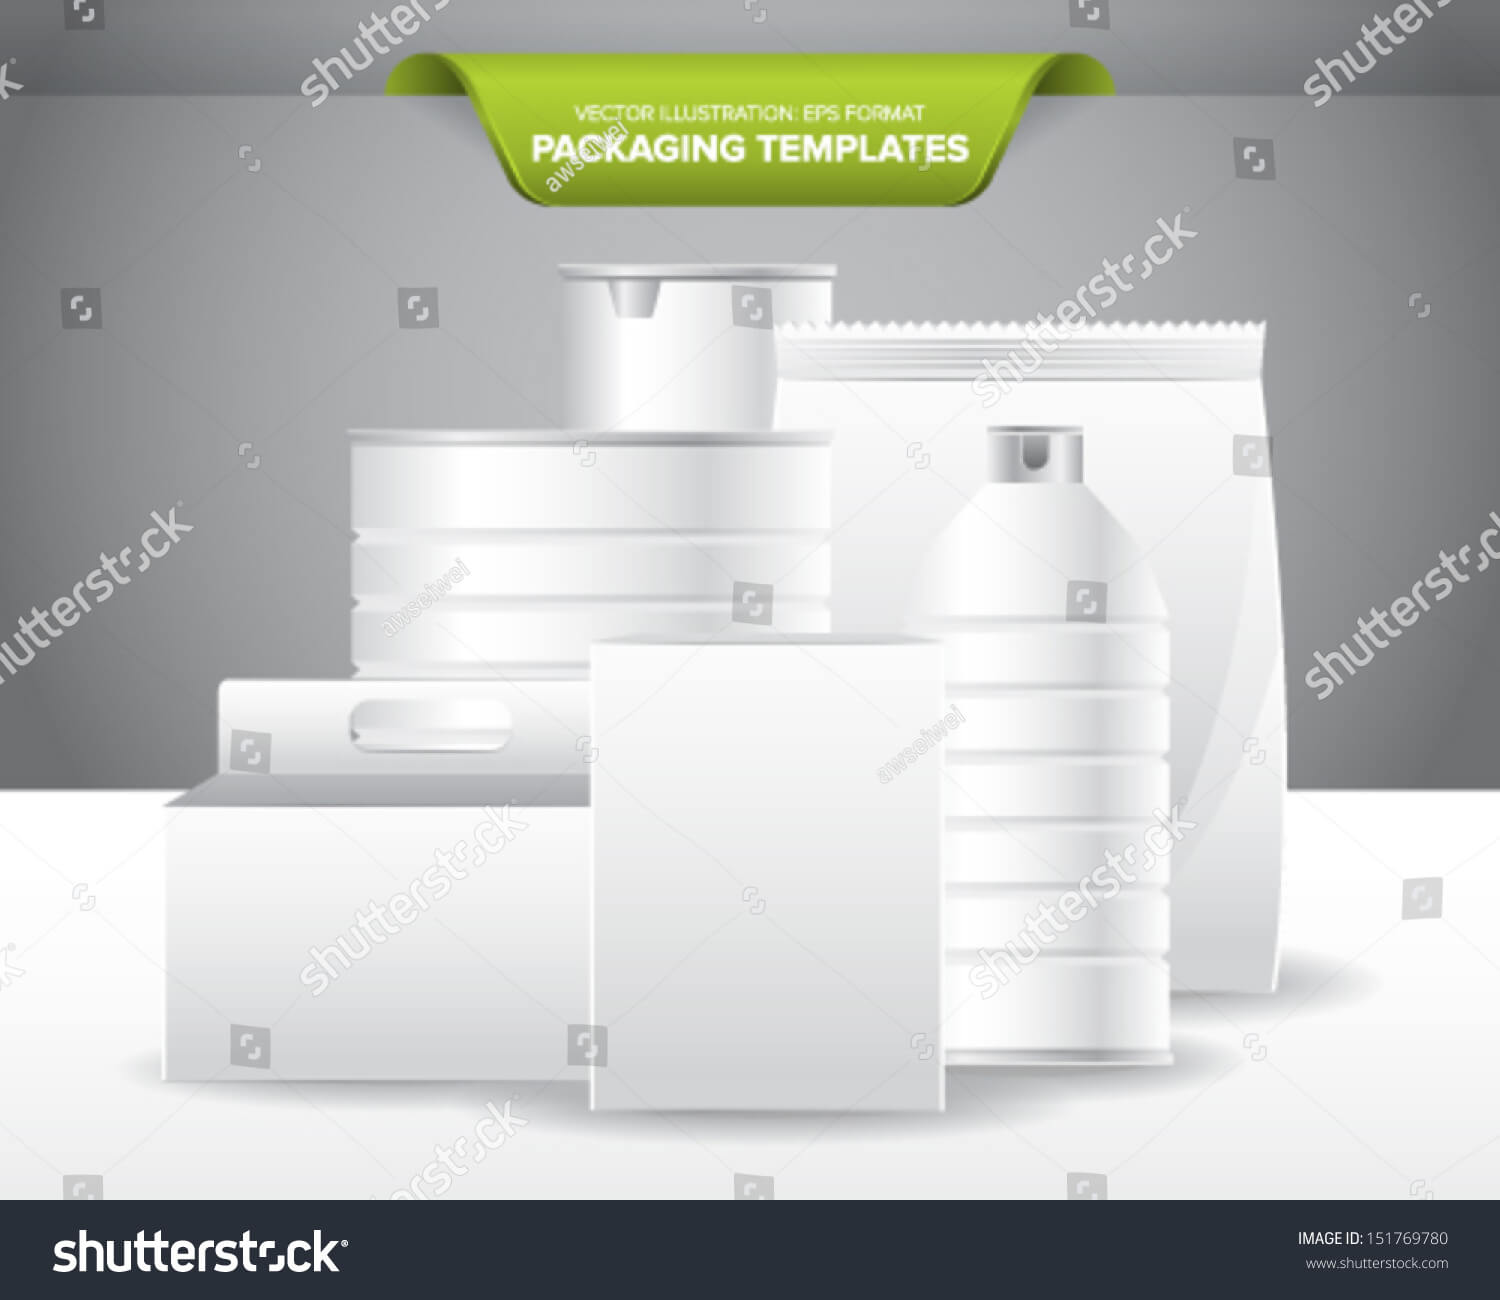 Set Empty Blank Packaging Templates Food Stock Image In Blank Packaging Templates